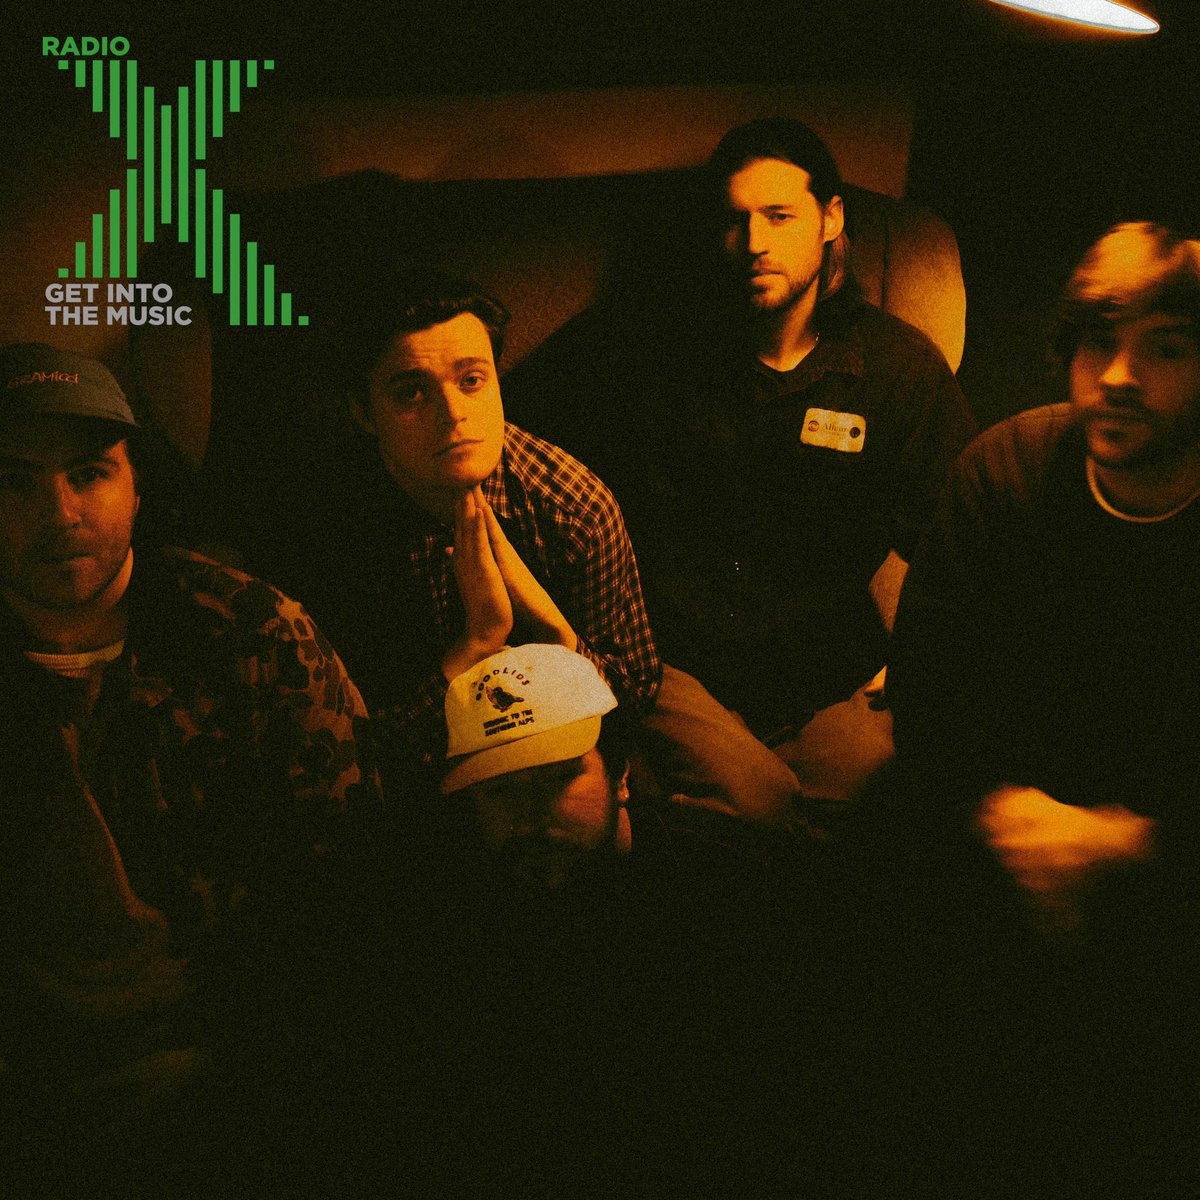 Big thanks to @RadioX for adding us to your X-posture list x